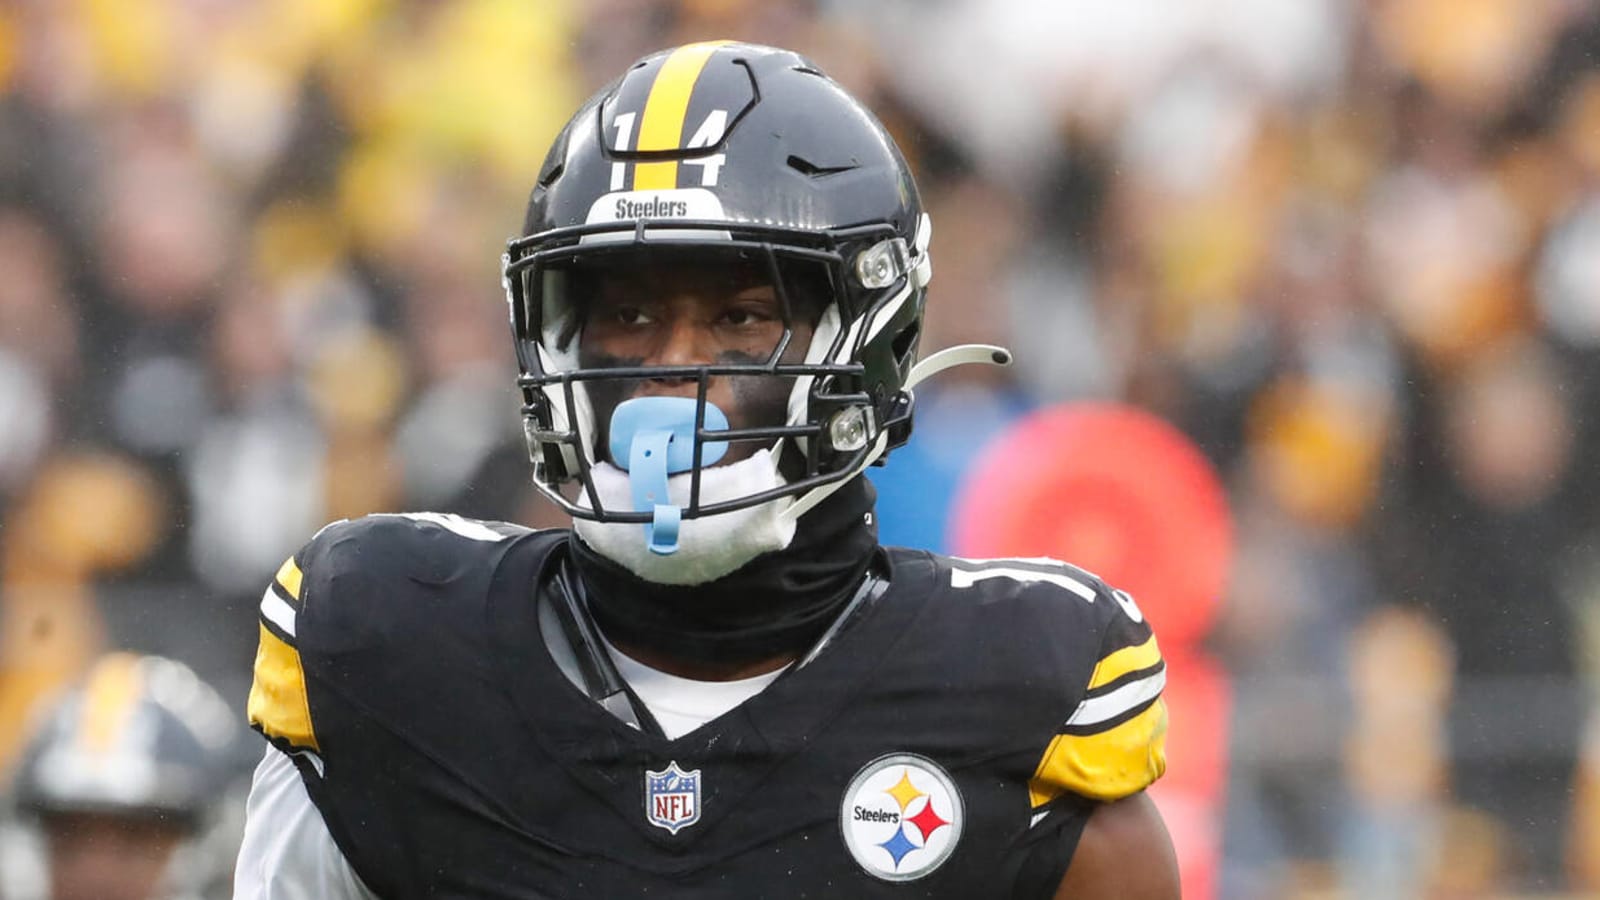 Former player rips Steelers WR after another lazy performance